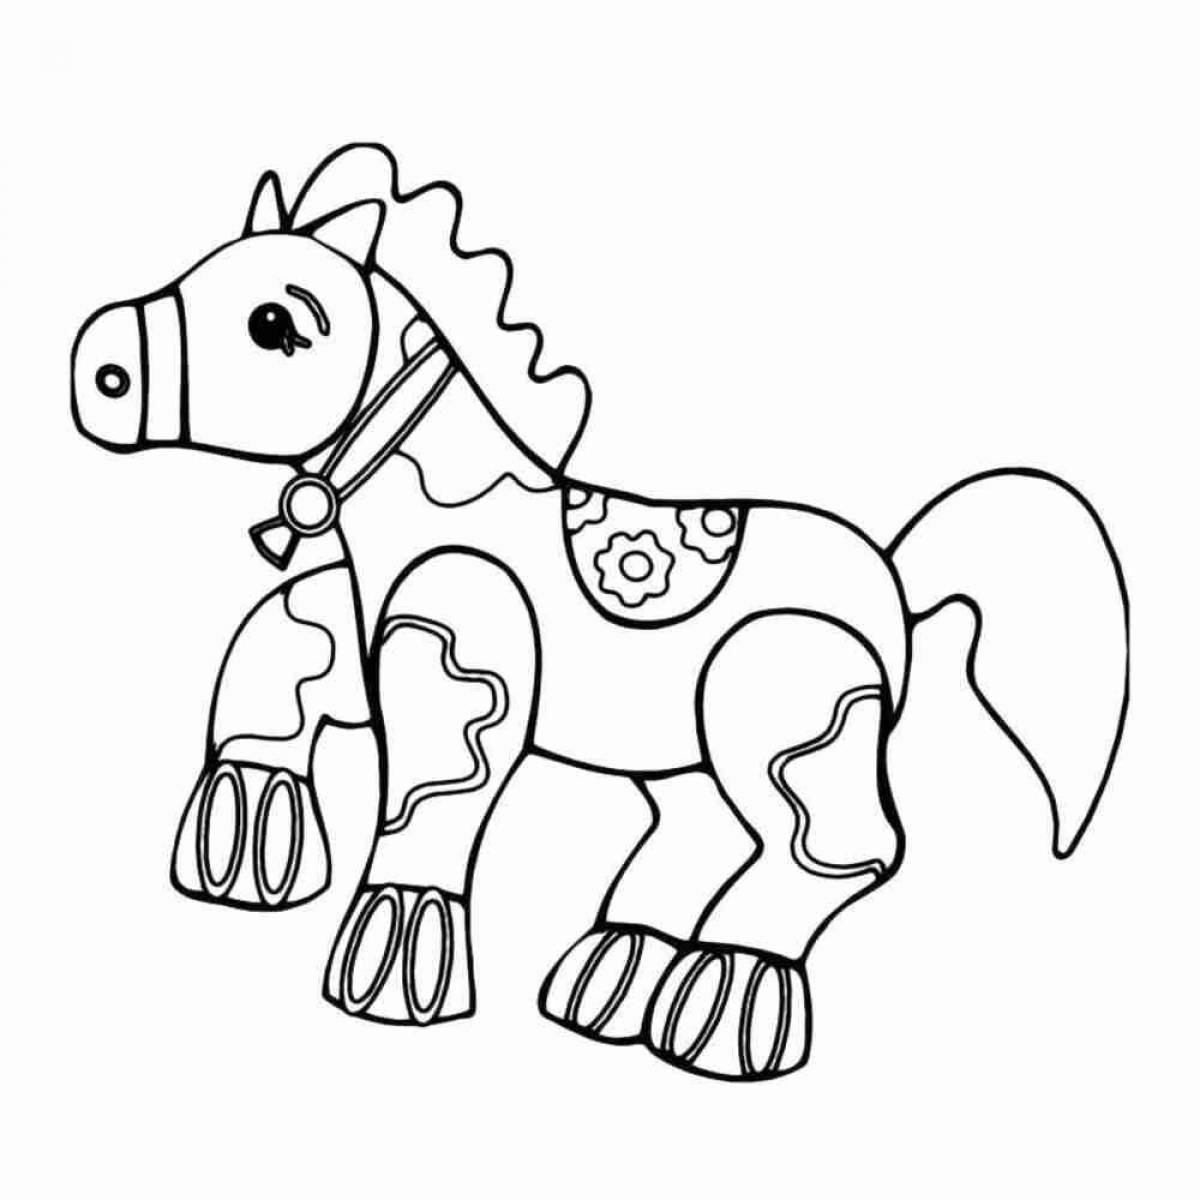 Generous coloring horse for children 5-6 years old